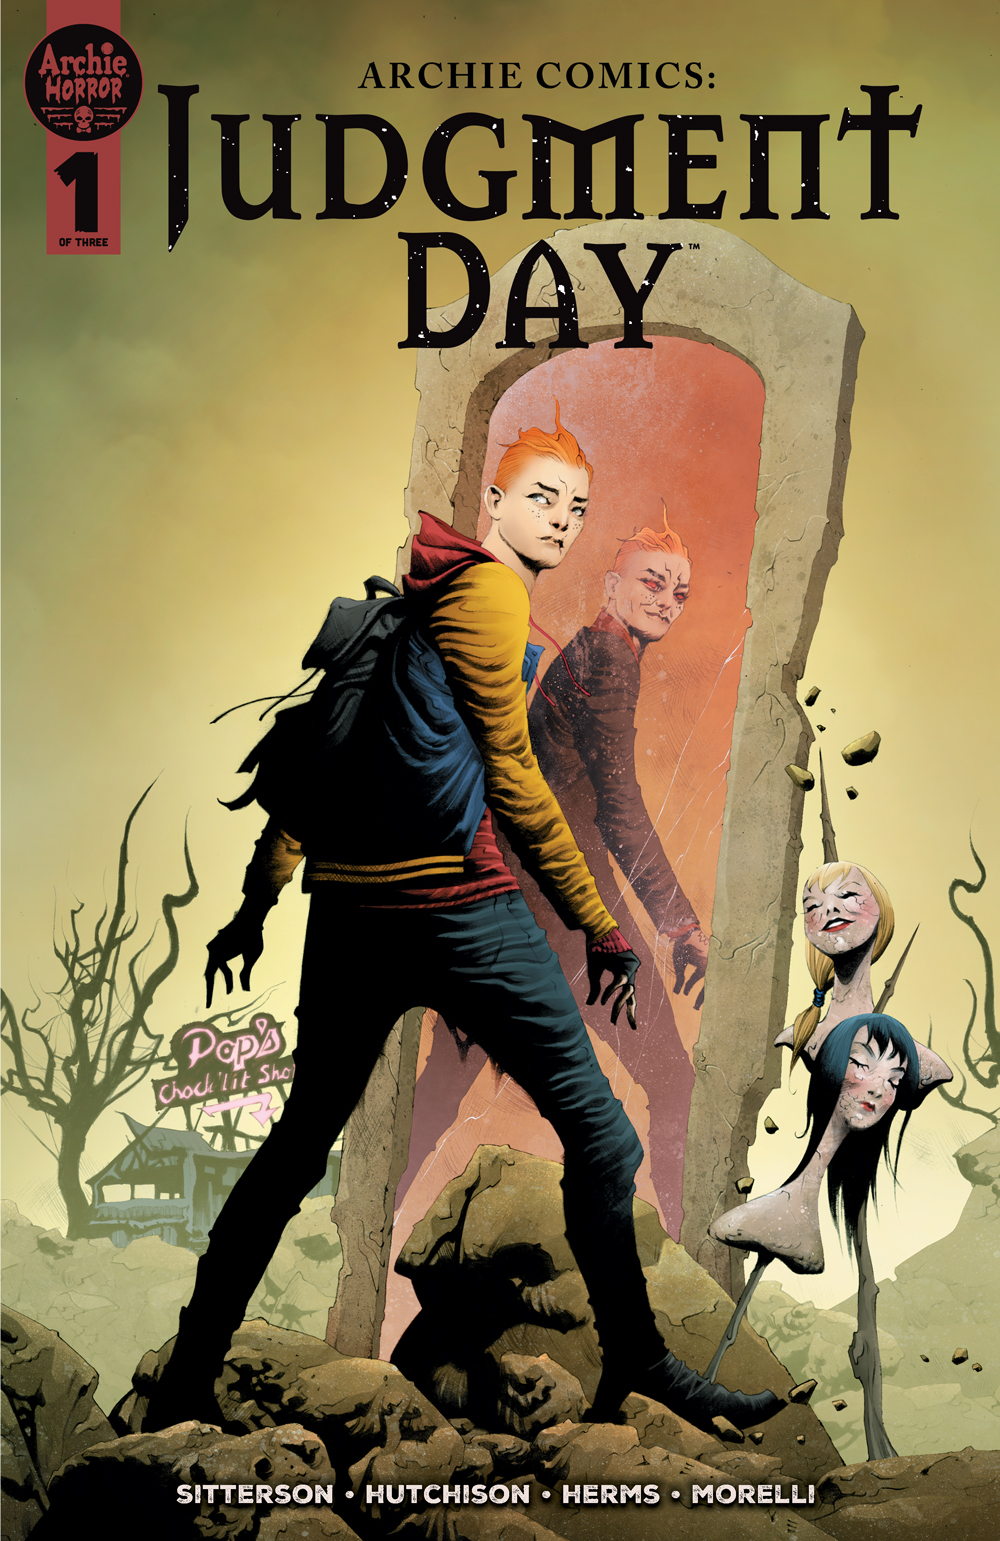 Archie Andrews walks through an eerie desolate landscape with severed heads on spikes. He walks by a mirror and his reflection looks darker and more sinister.